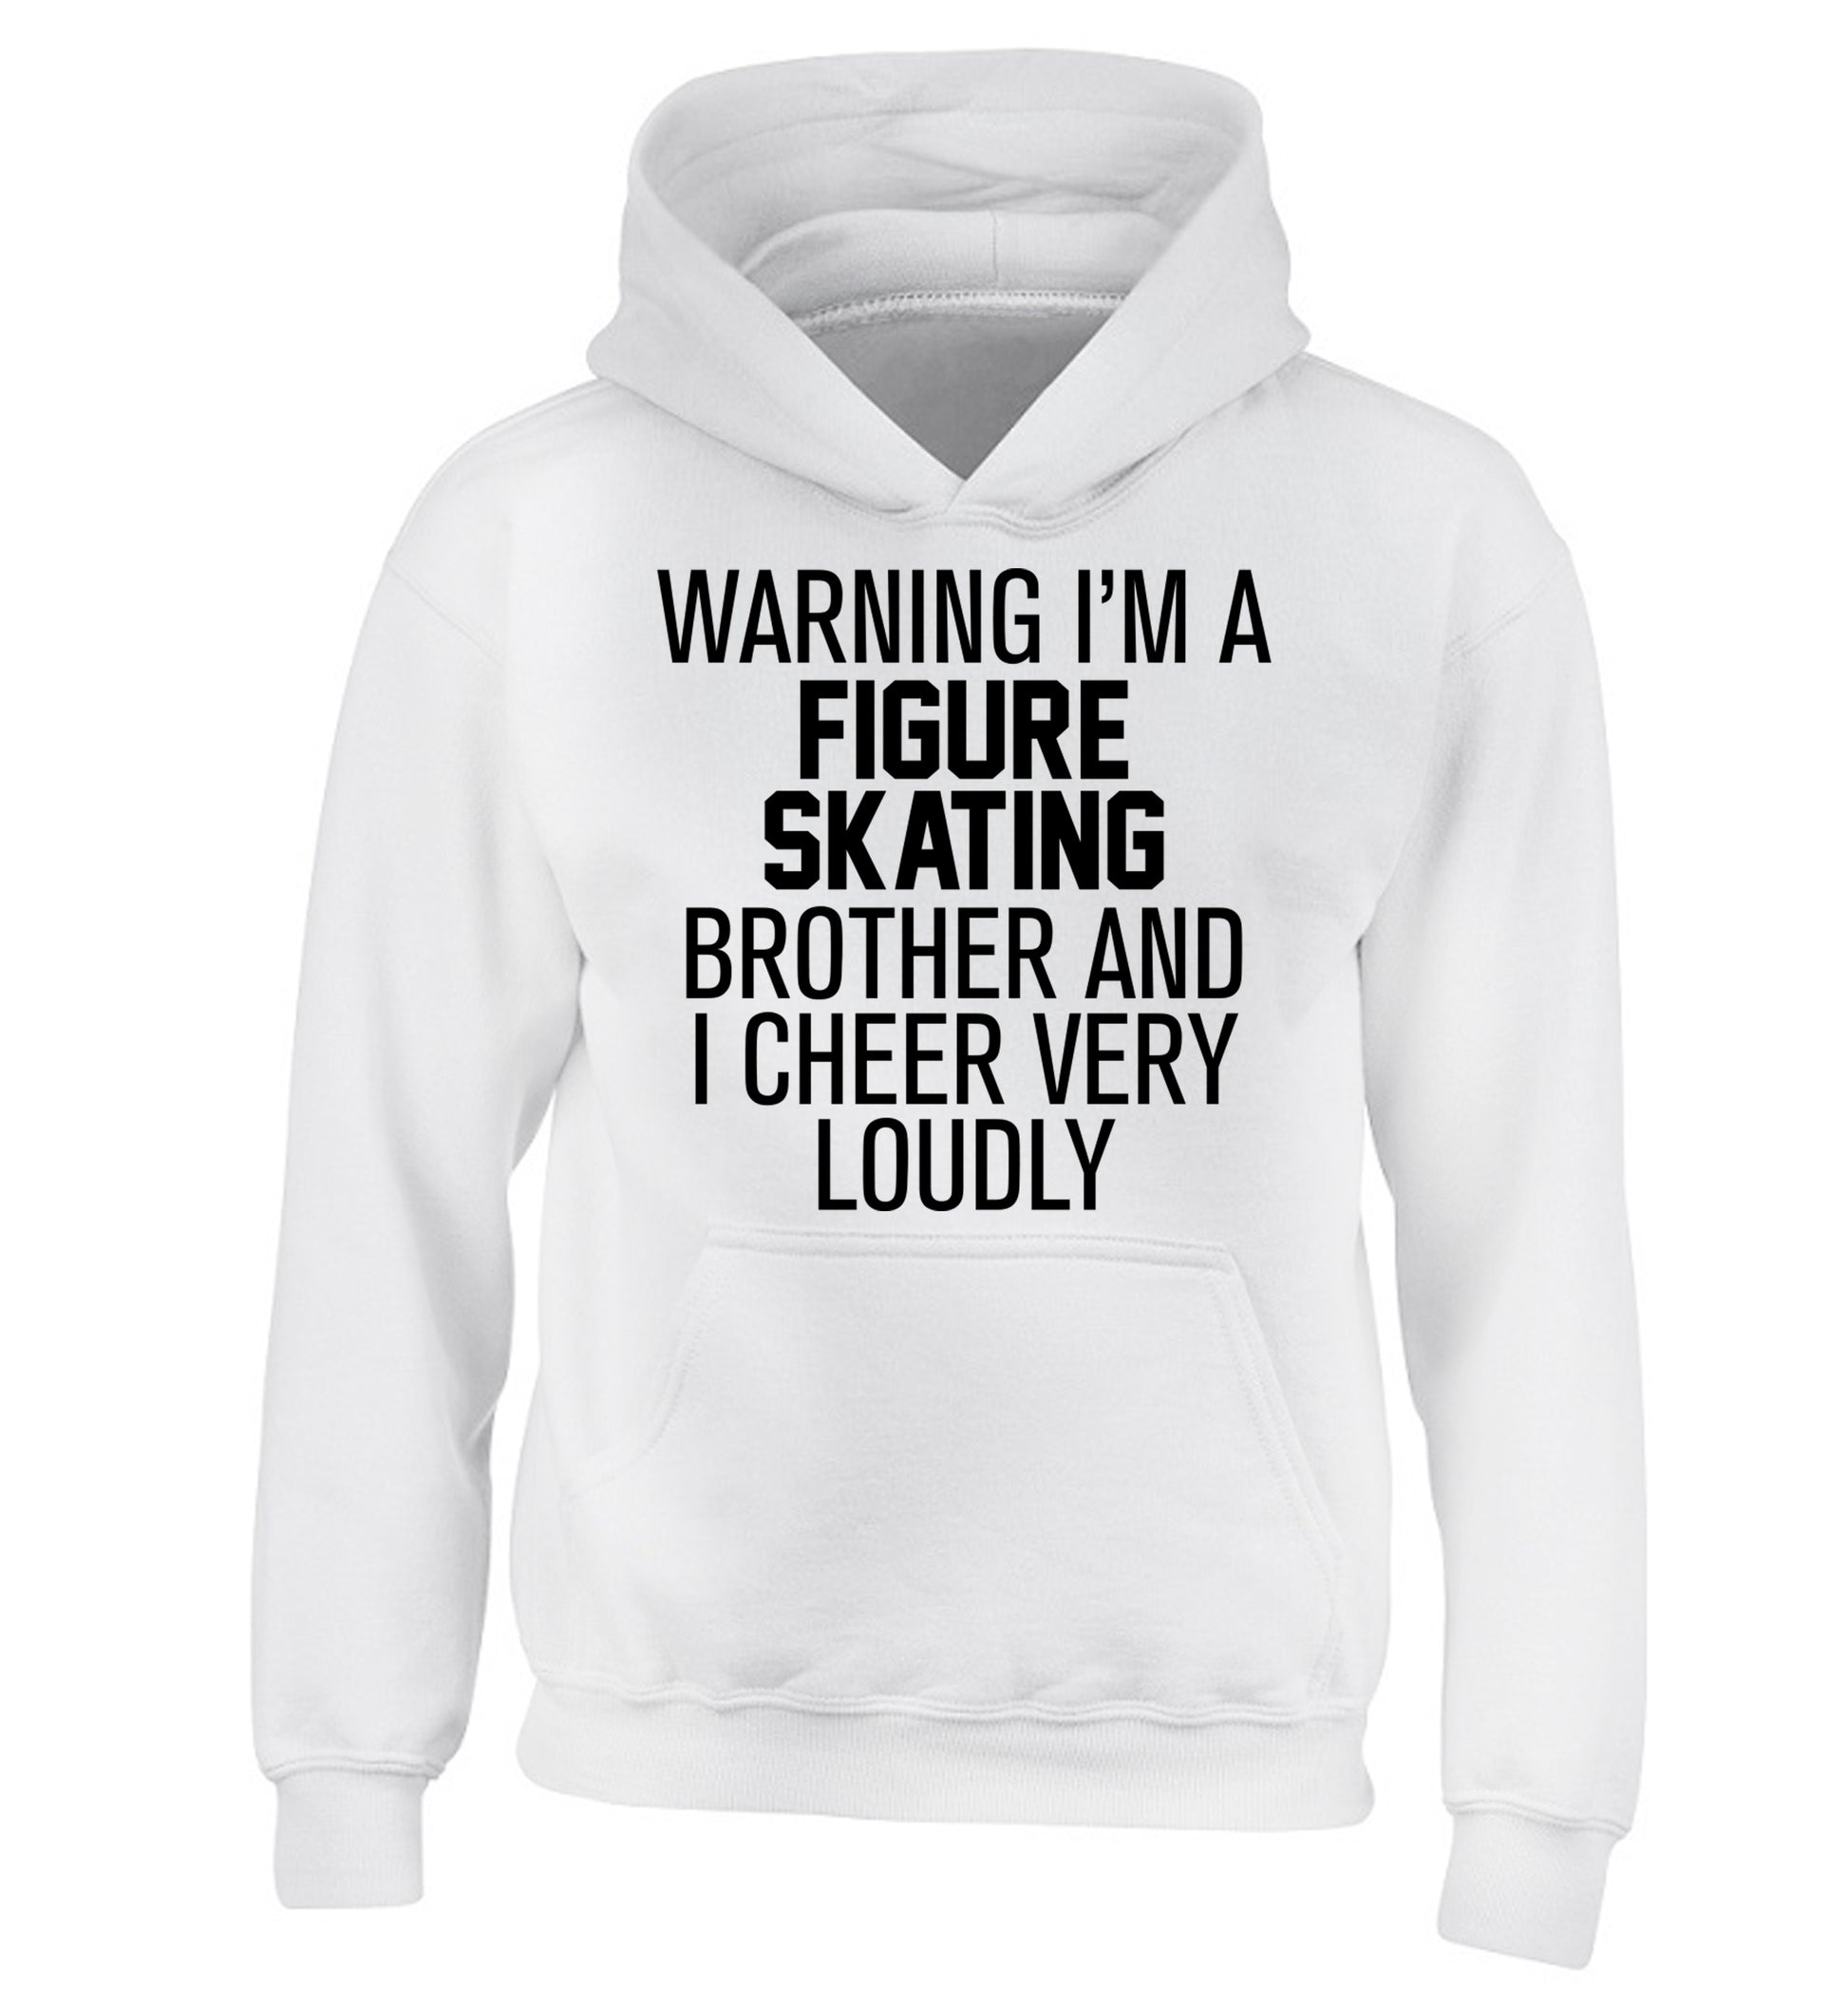 Warning I'm a figure skating brother and I cheer very loudly children's white hoodie 12-14 Years